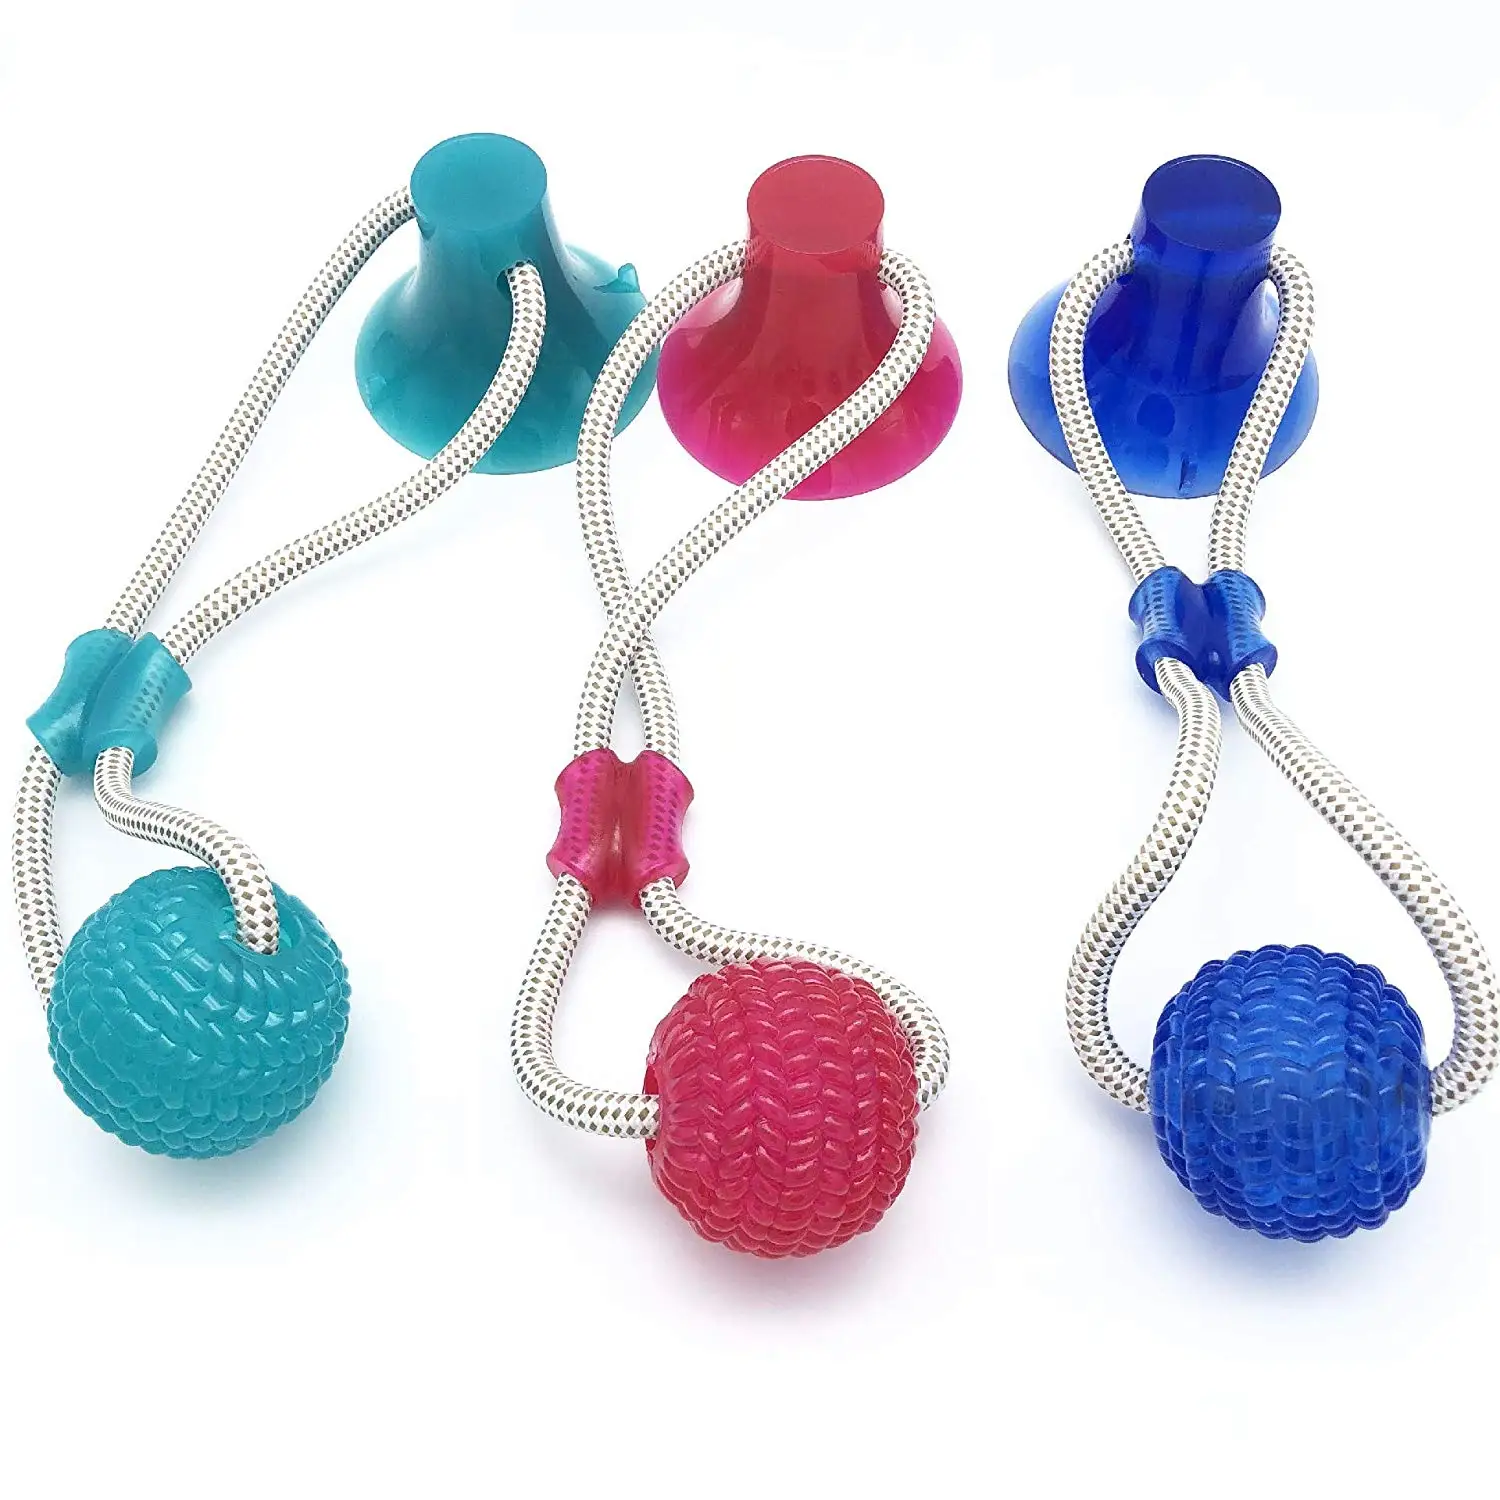 

Molar bite ball Dog Toy Suction cup Interactive fun Pet rope chew toy suction cup dog Tooth Cleaning/Chewing bite ball toy, Red,green,blue